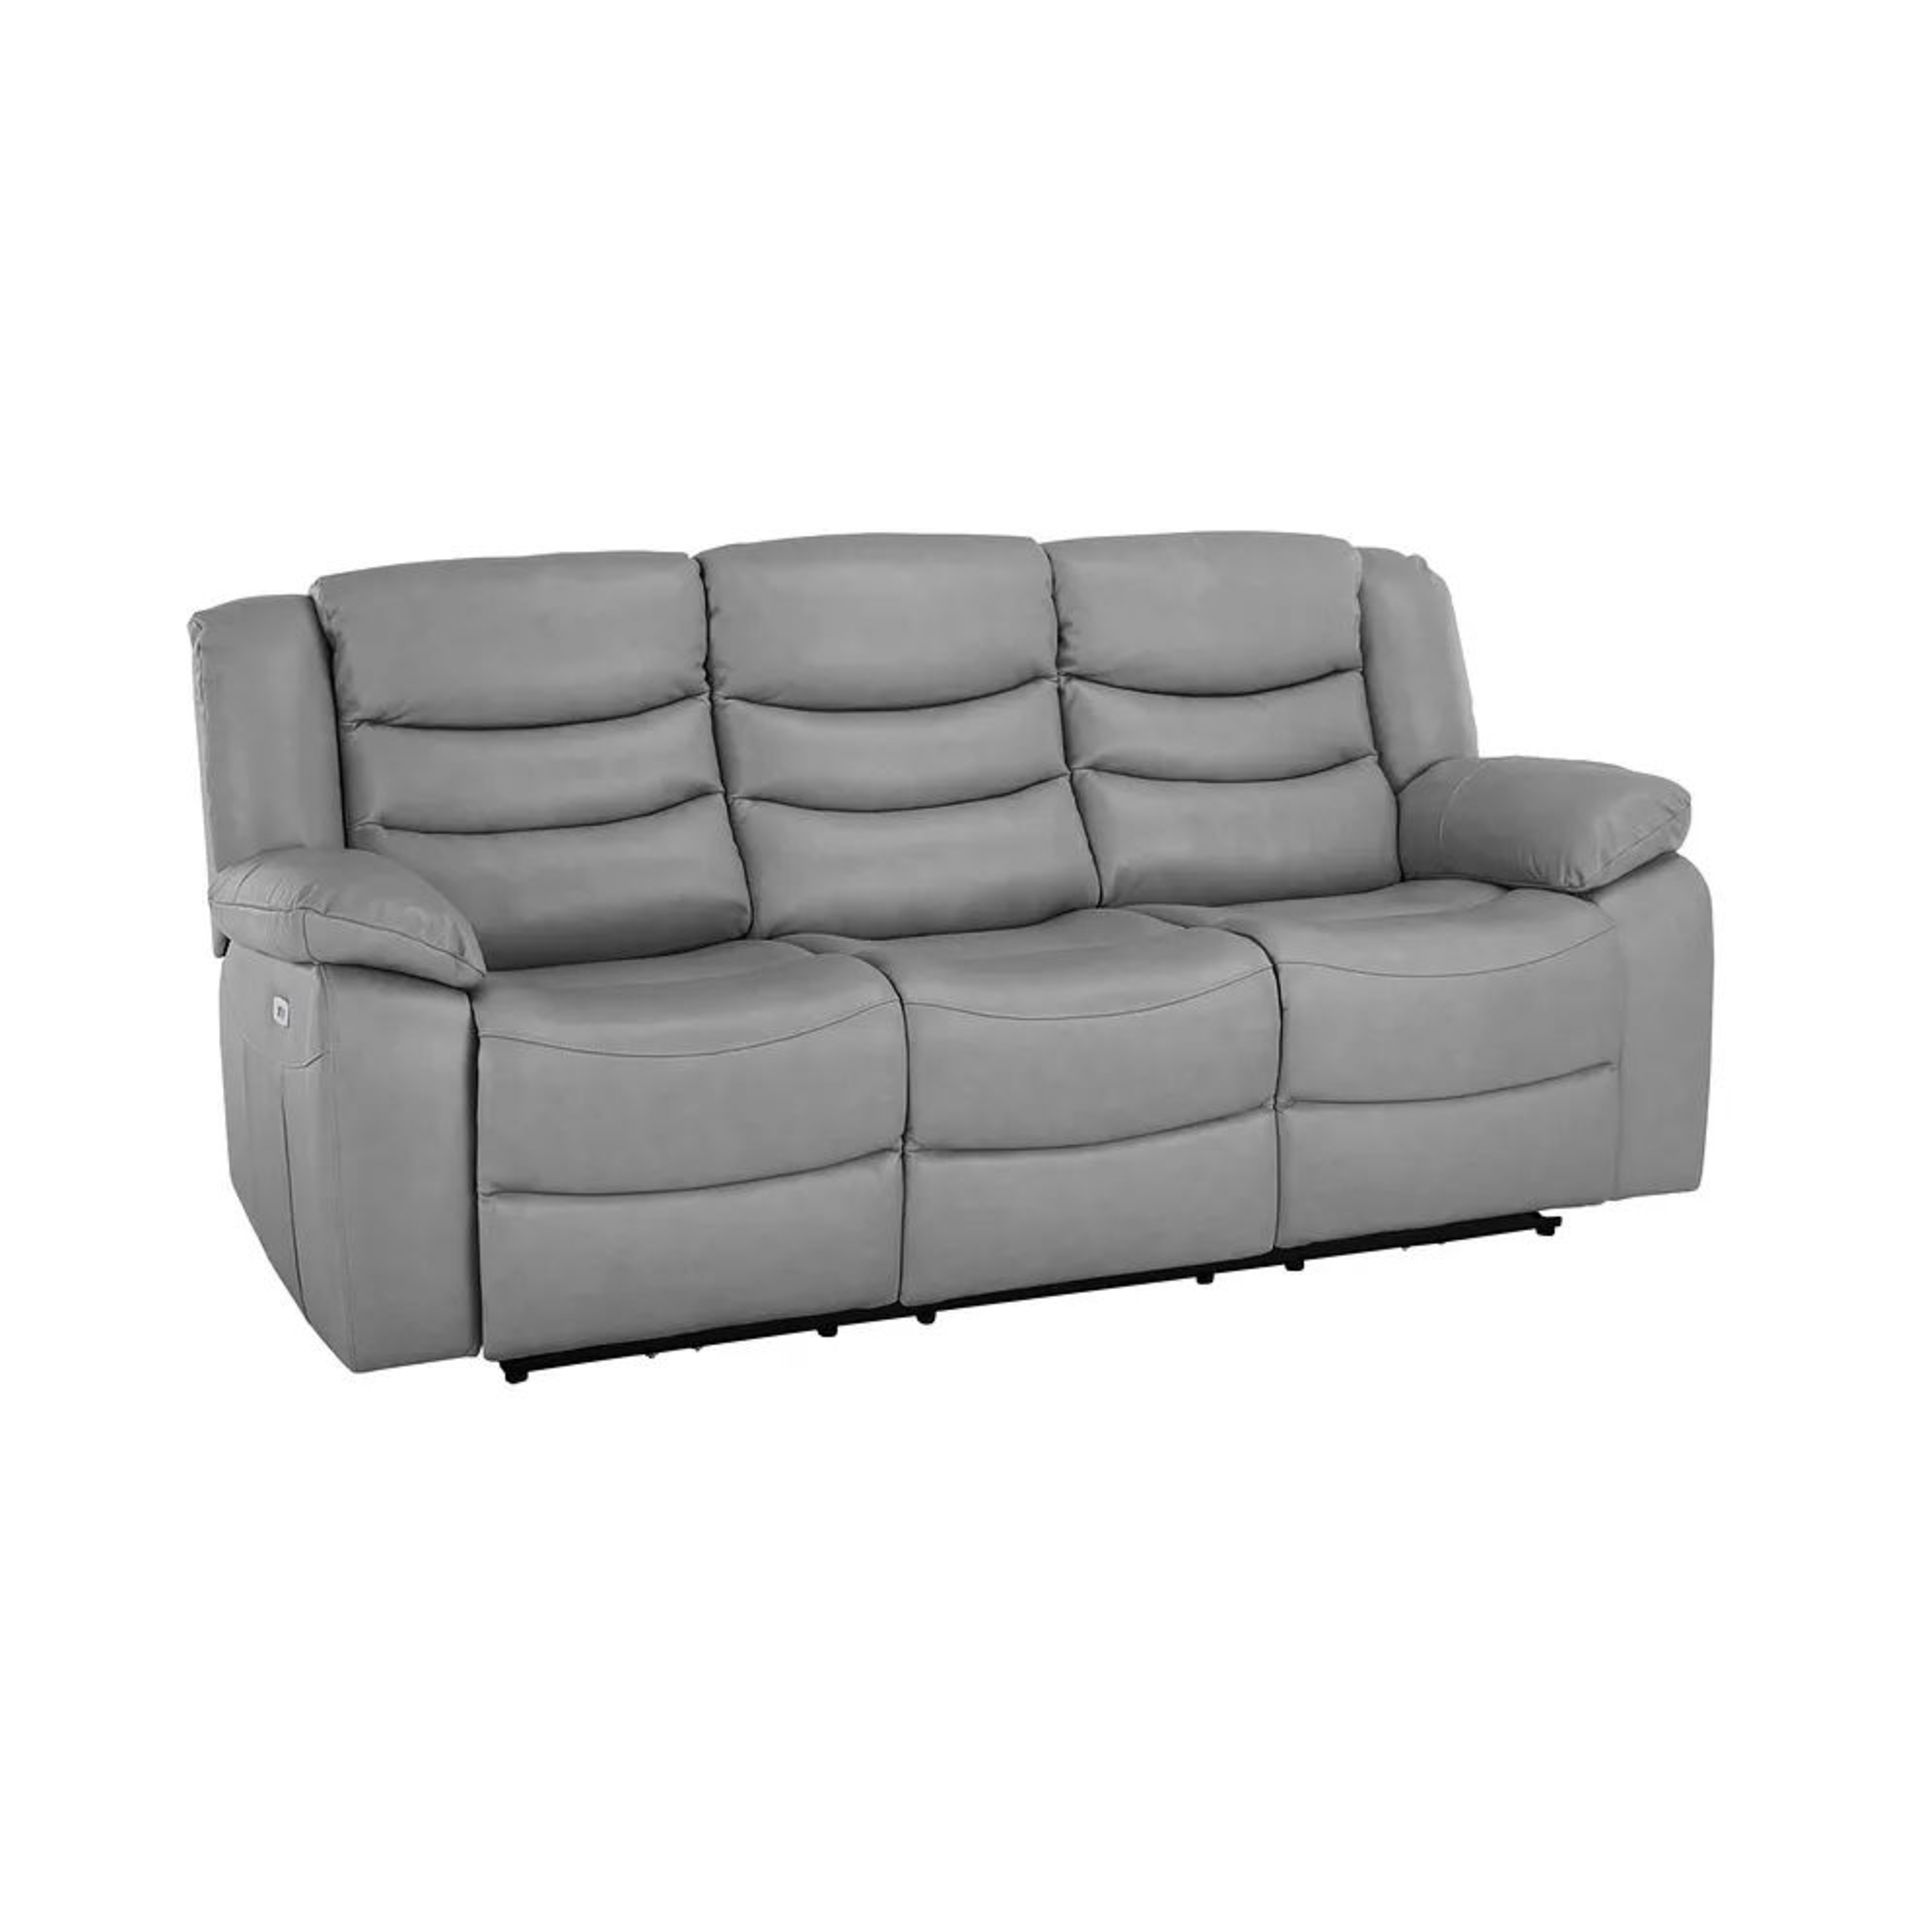 BRAND NEW MARLOW 3 Seater Electric Recliner Sofa - LIGHT GREY LEATHER. RRP £1849. Our Marlow leather